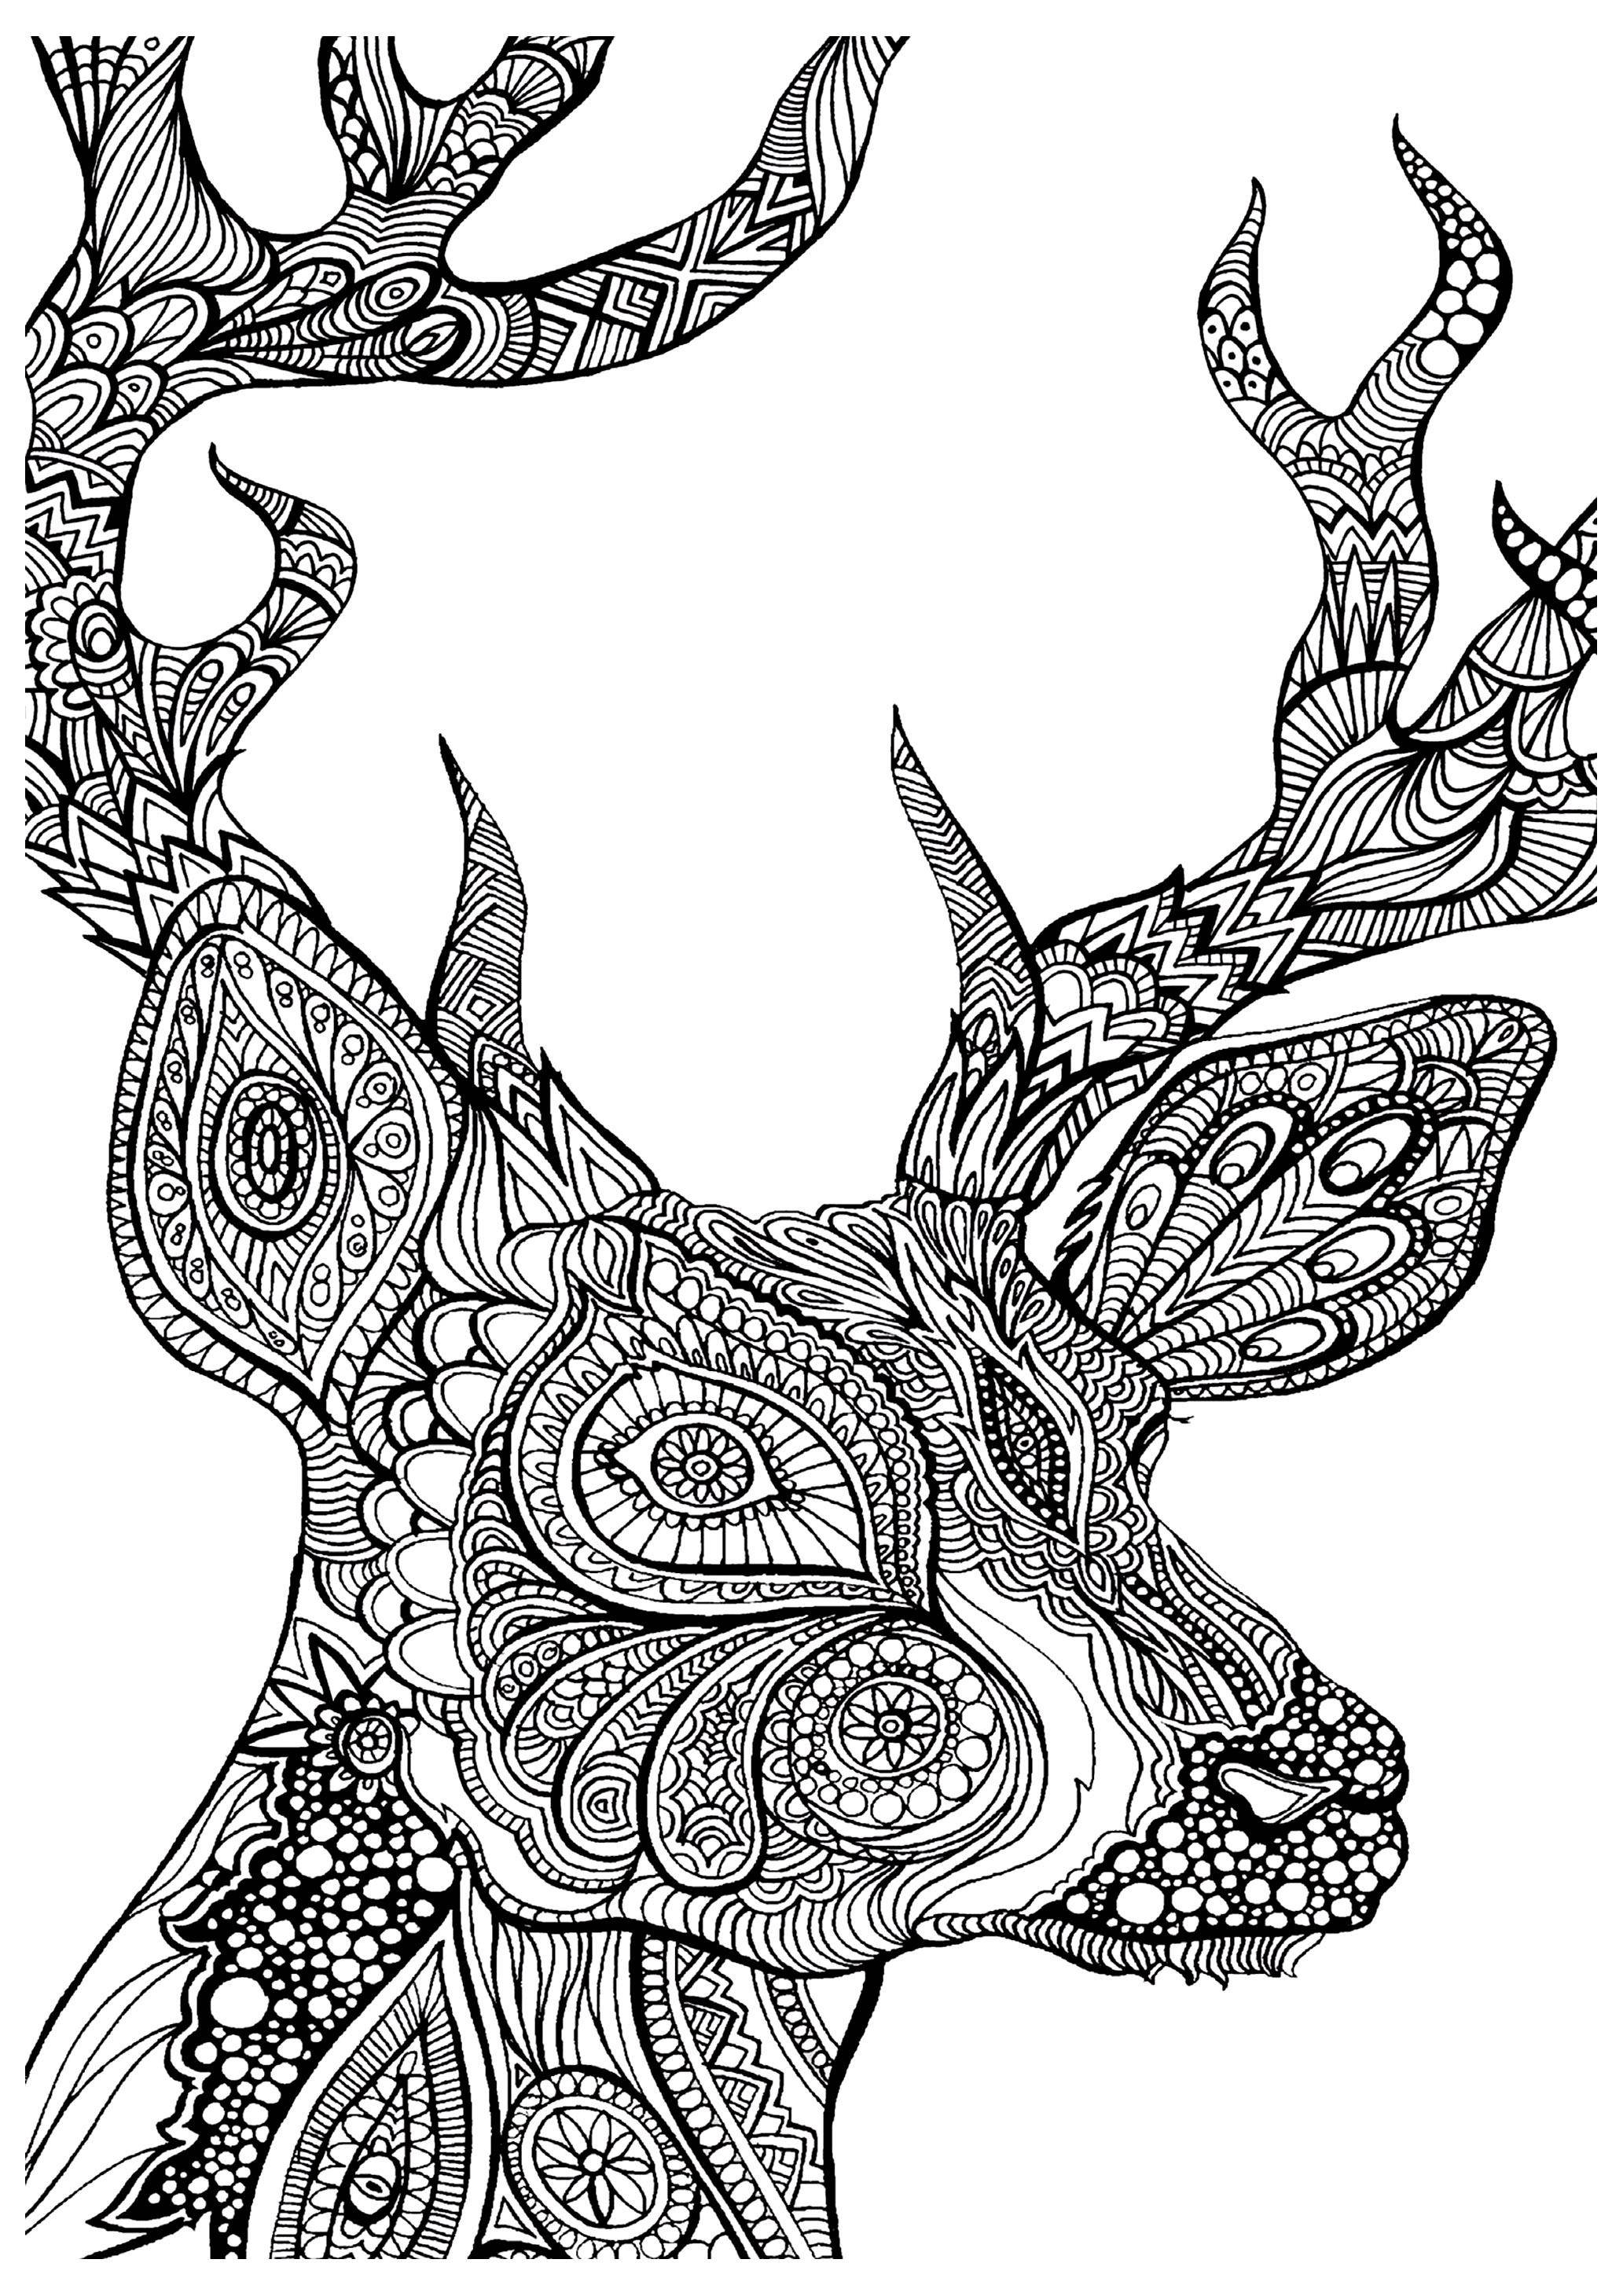 Coloring Deer in the patterns. Category Animals. Tags:  Animals, patterns.